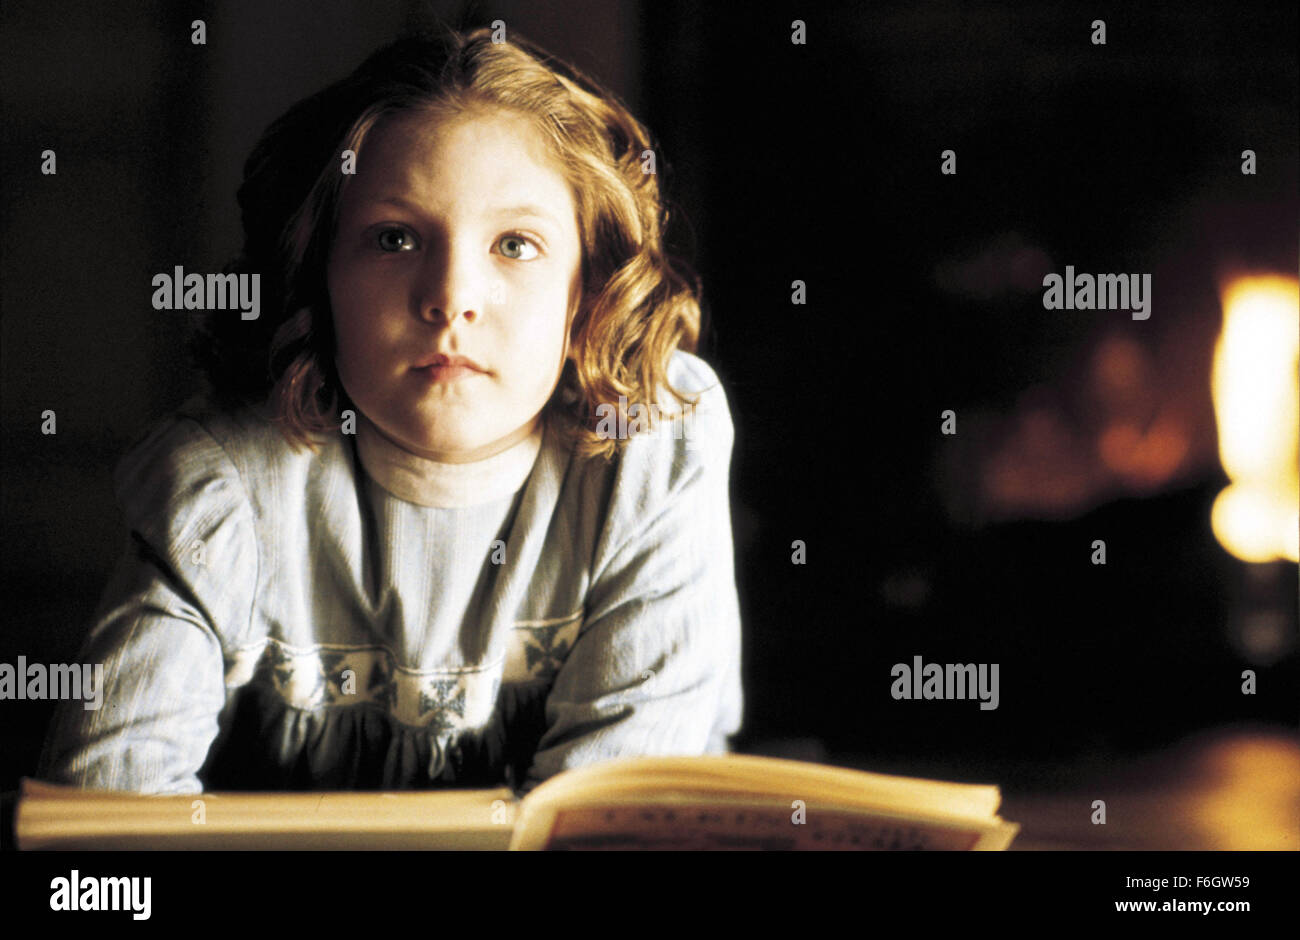 Aug 02, 2001; Long Island, NV, USA; ALAKINA MANN stars as Anne in the thrilling horror drama 'The Others' directed by Alejandro Amenabar. Stock Photo